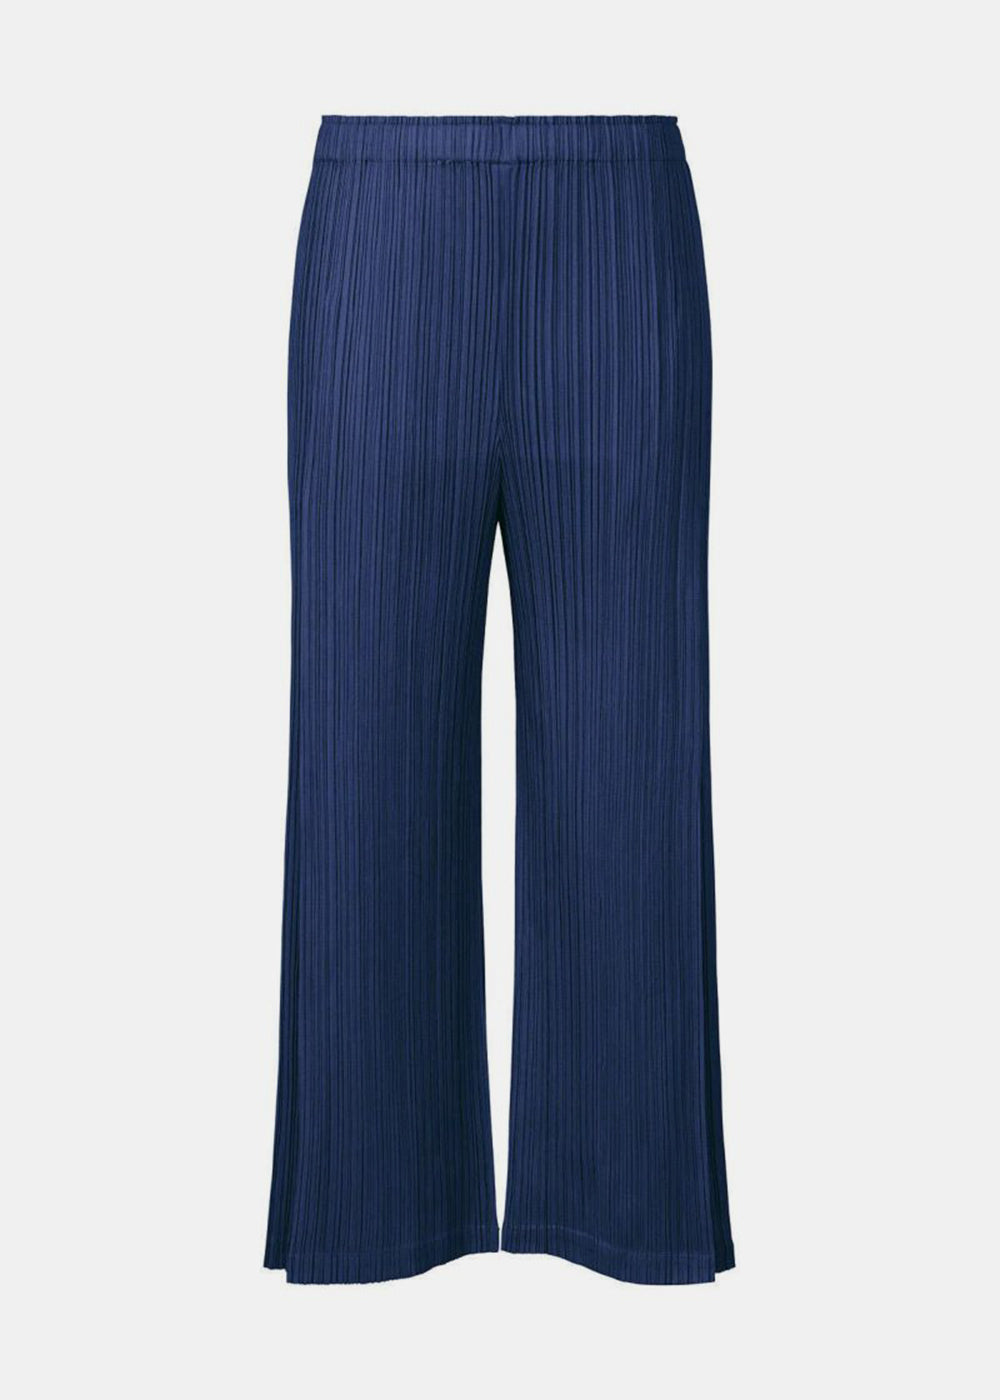 Pacelli Pleated Baggy Fit Royal Blue Dress Pants